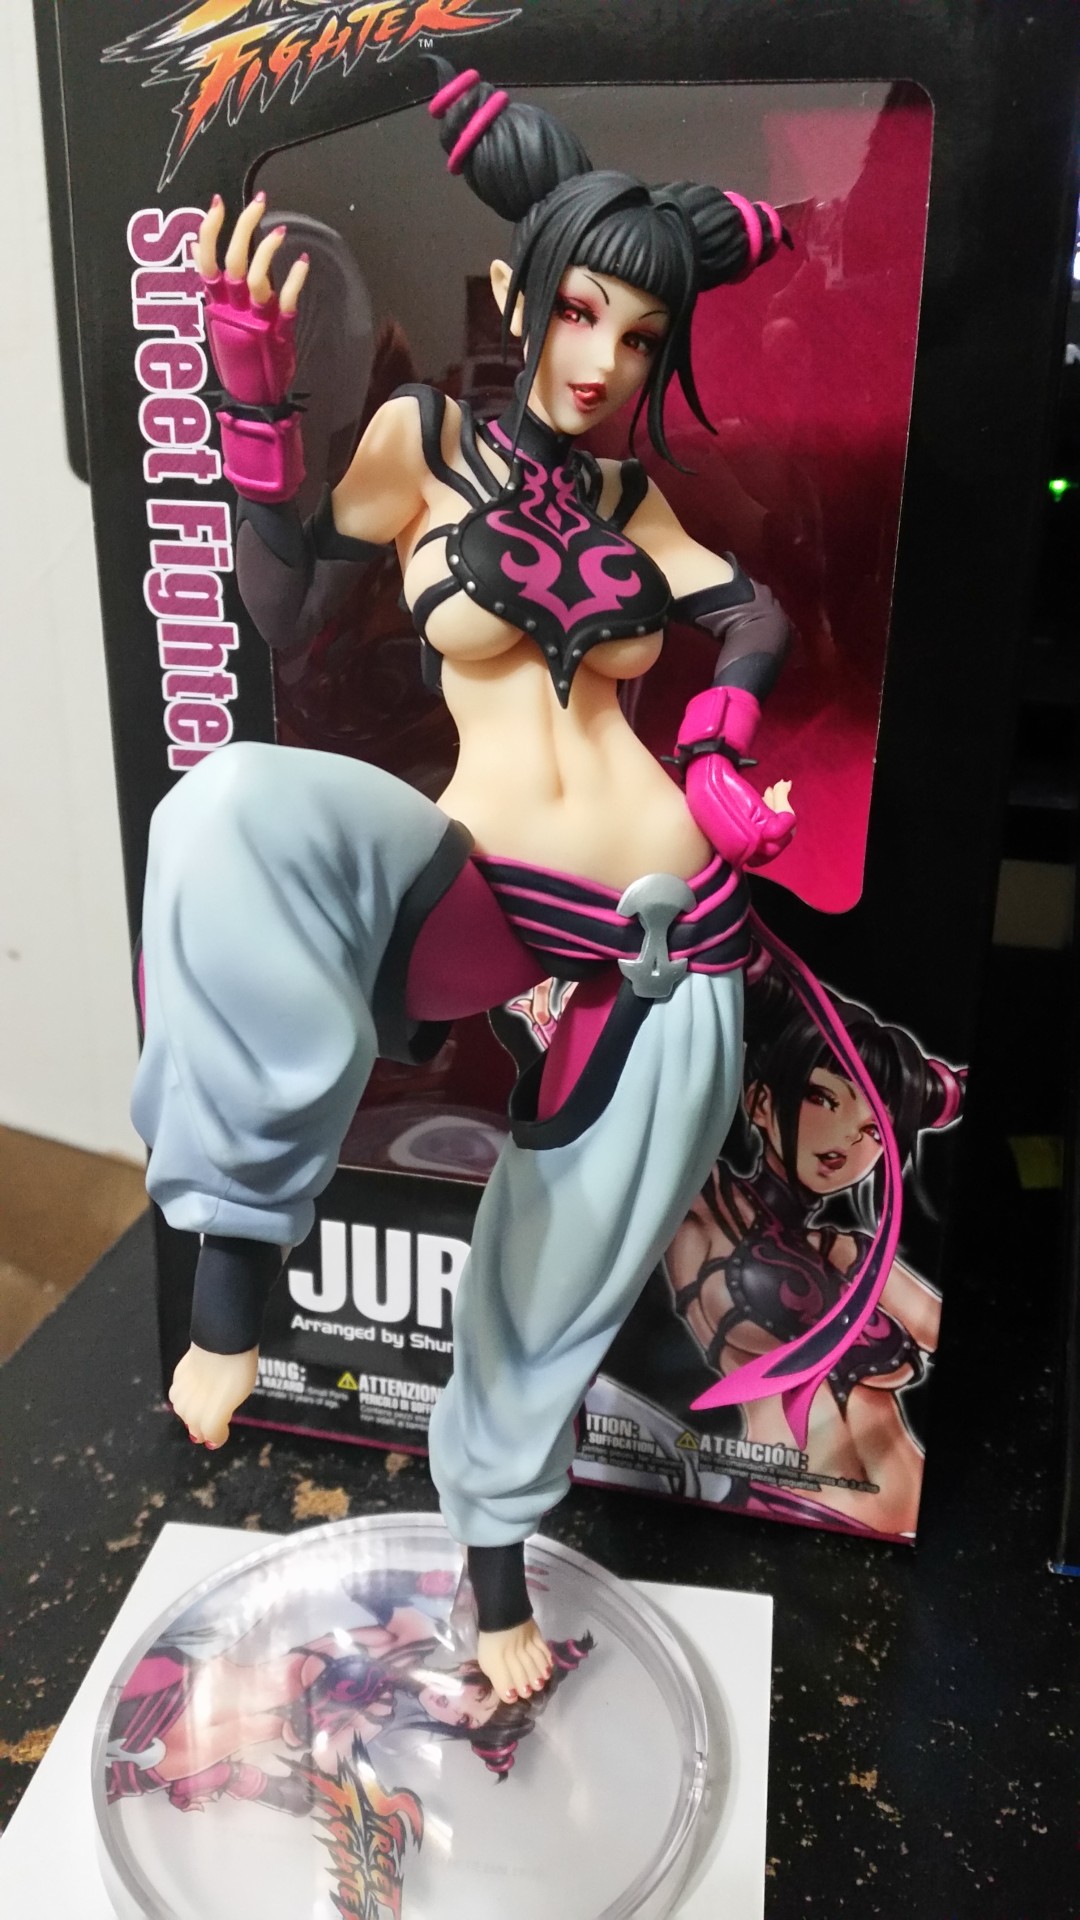 Juri arrived.I finally got a hold of a camera(that’s not on my 2ds) so I now have